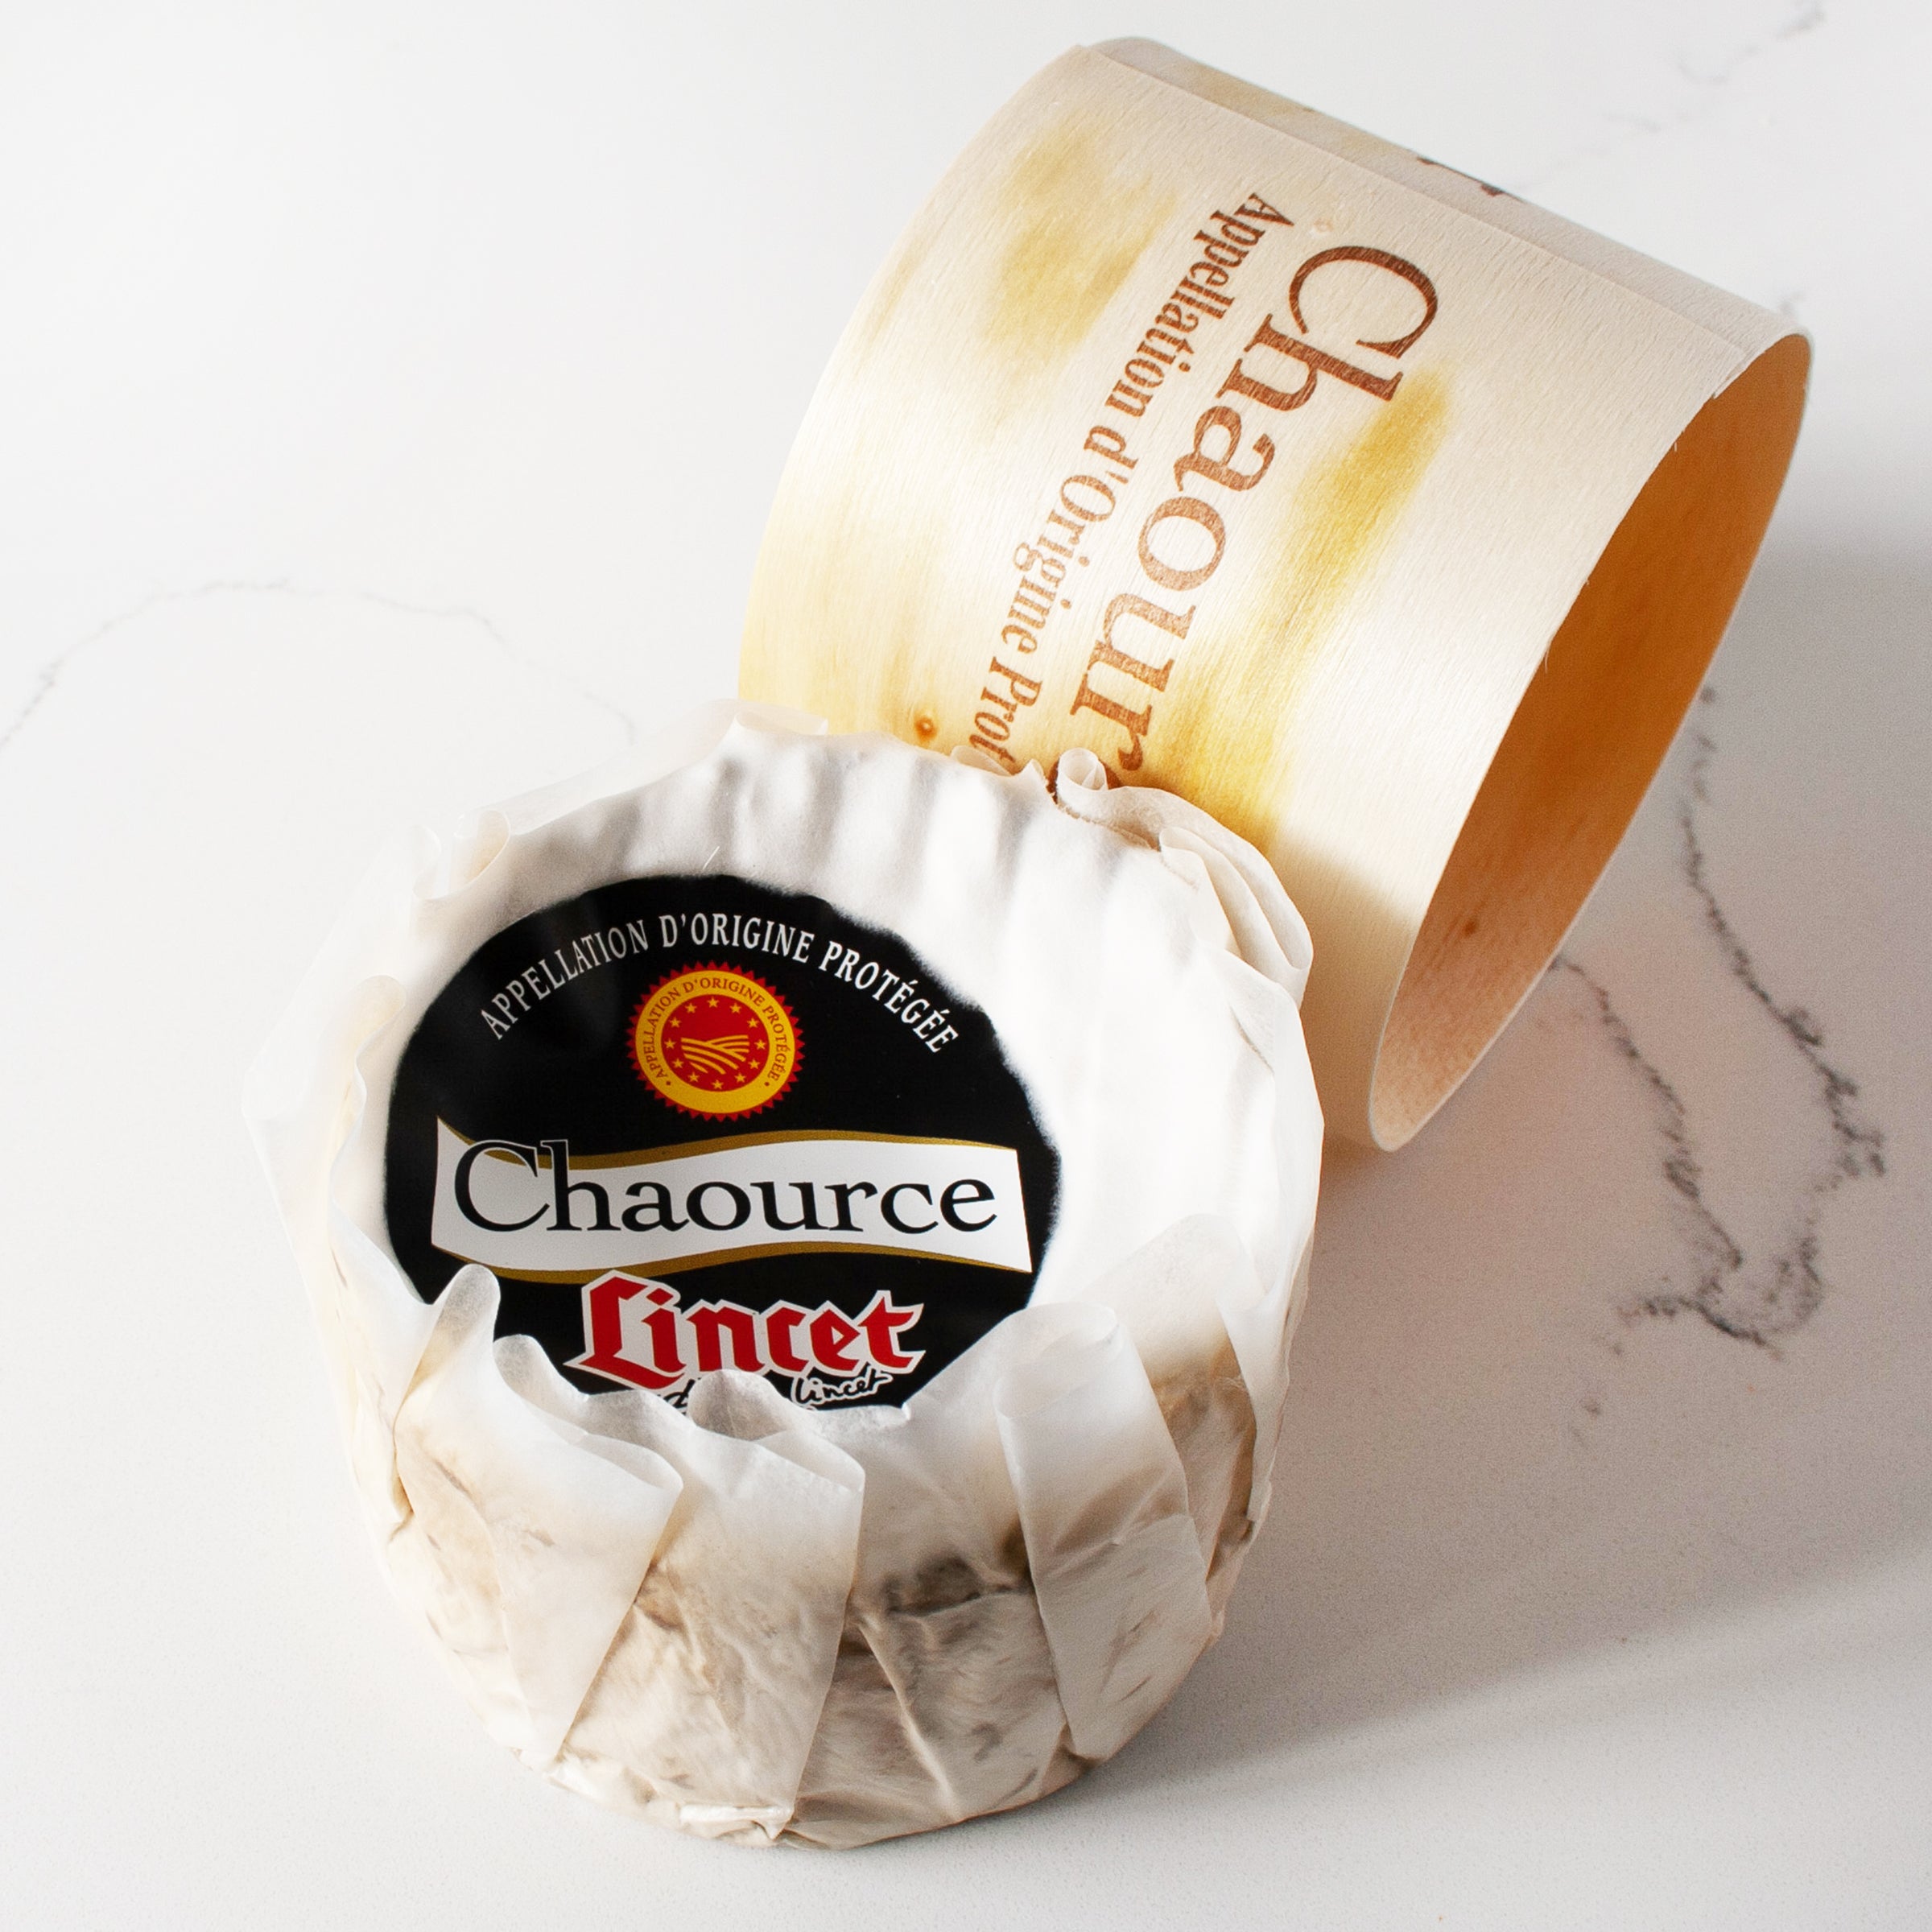 Chaource Cheese Aoplincetcheese Igourmet 